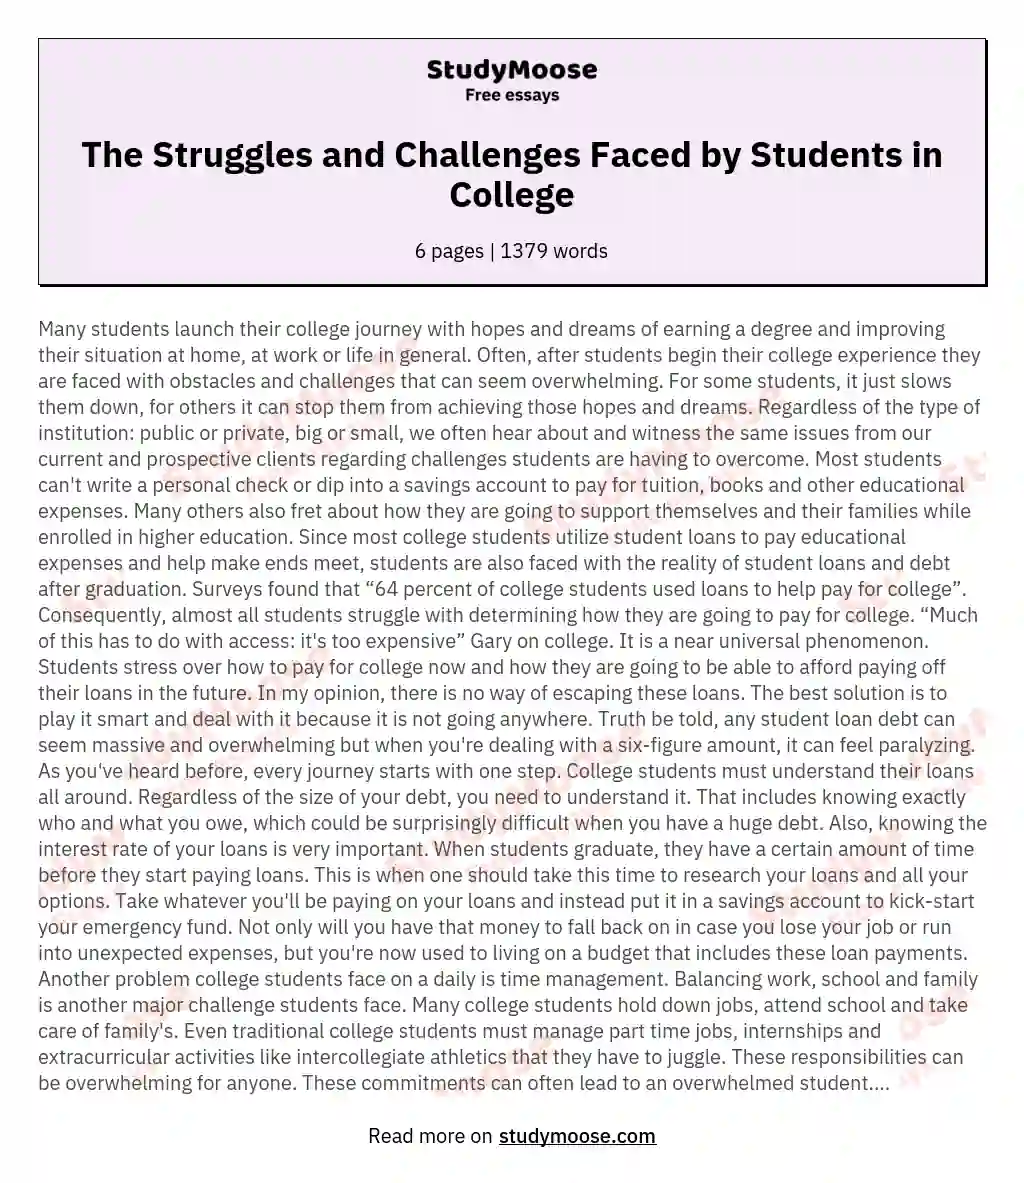 The Struggles and Challenges Faced by Students in College essay